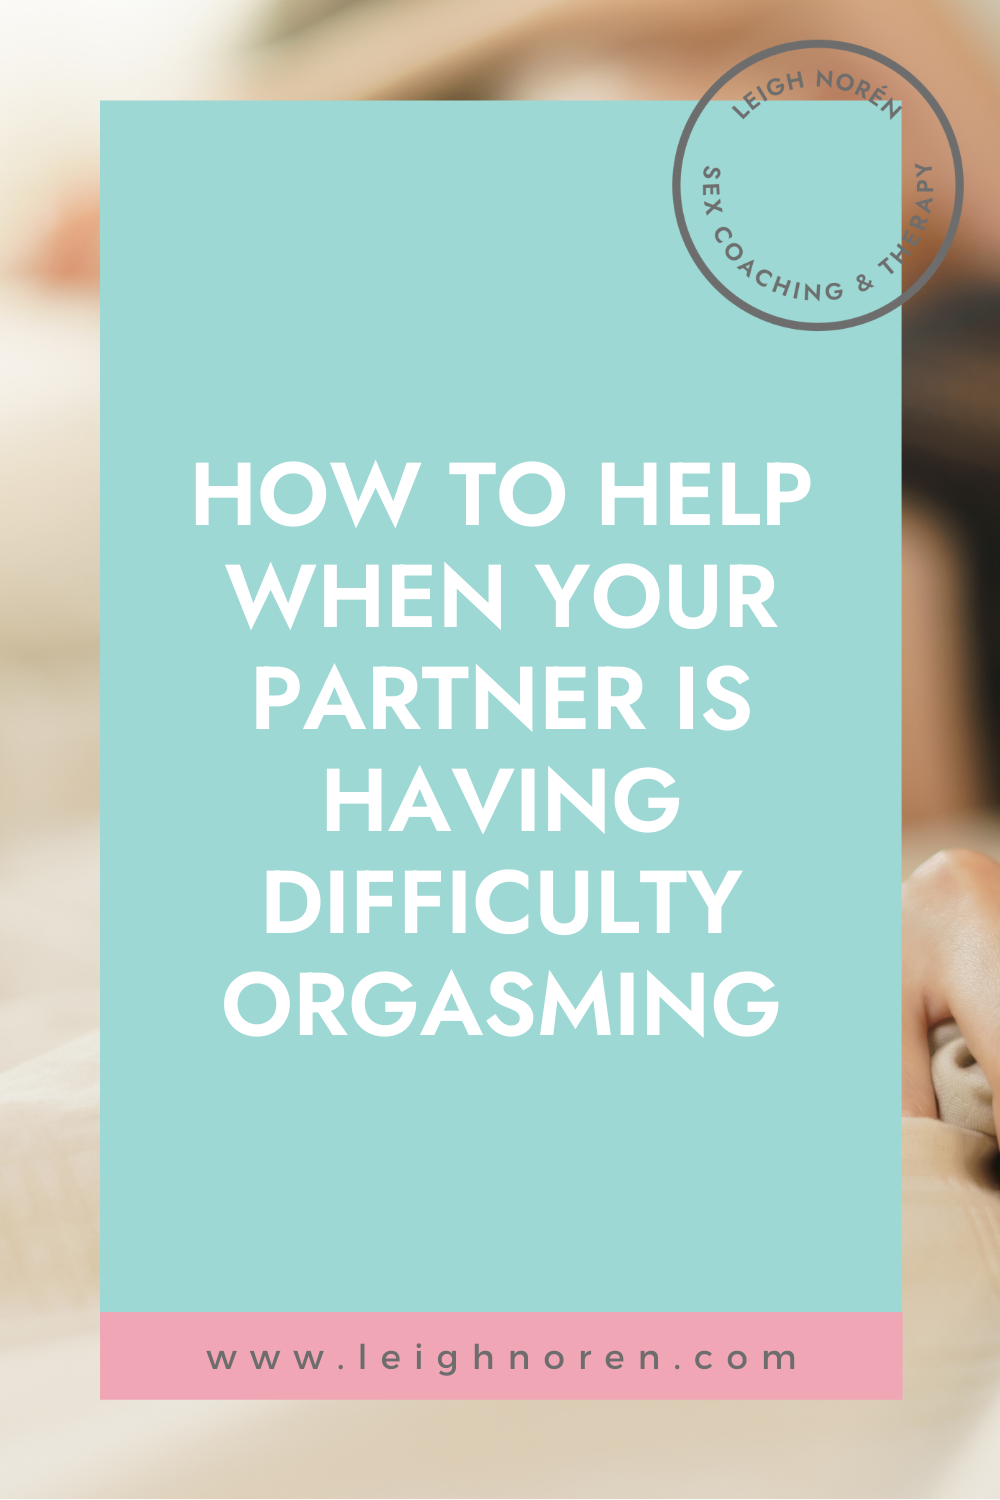 How To Help When Your Partner Is Having Difficulty Orgasming